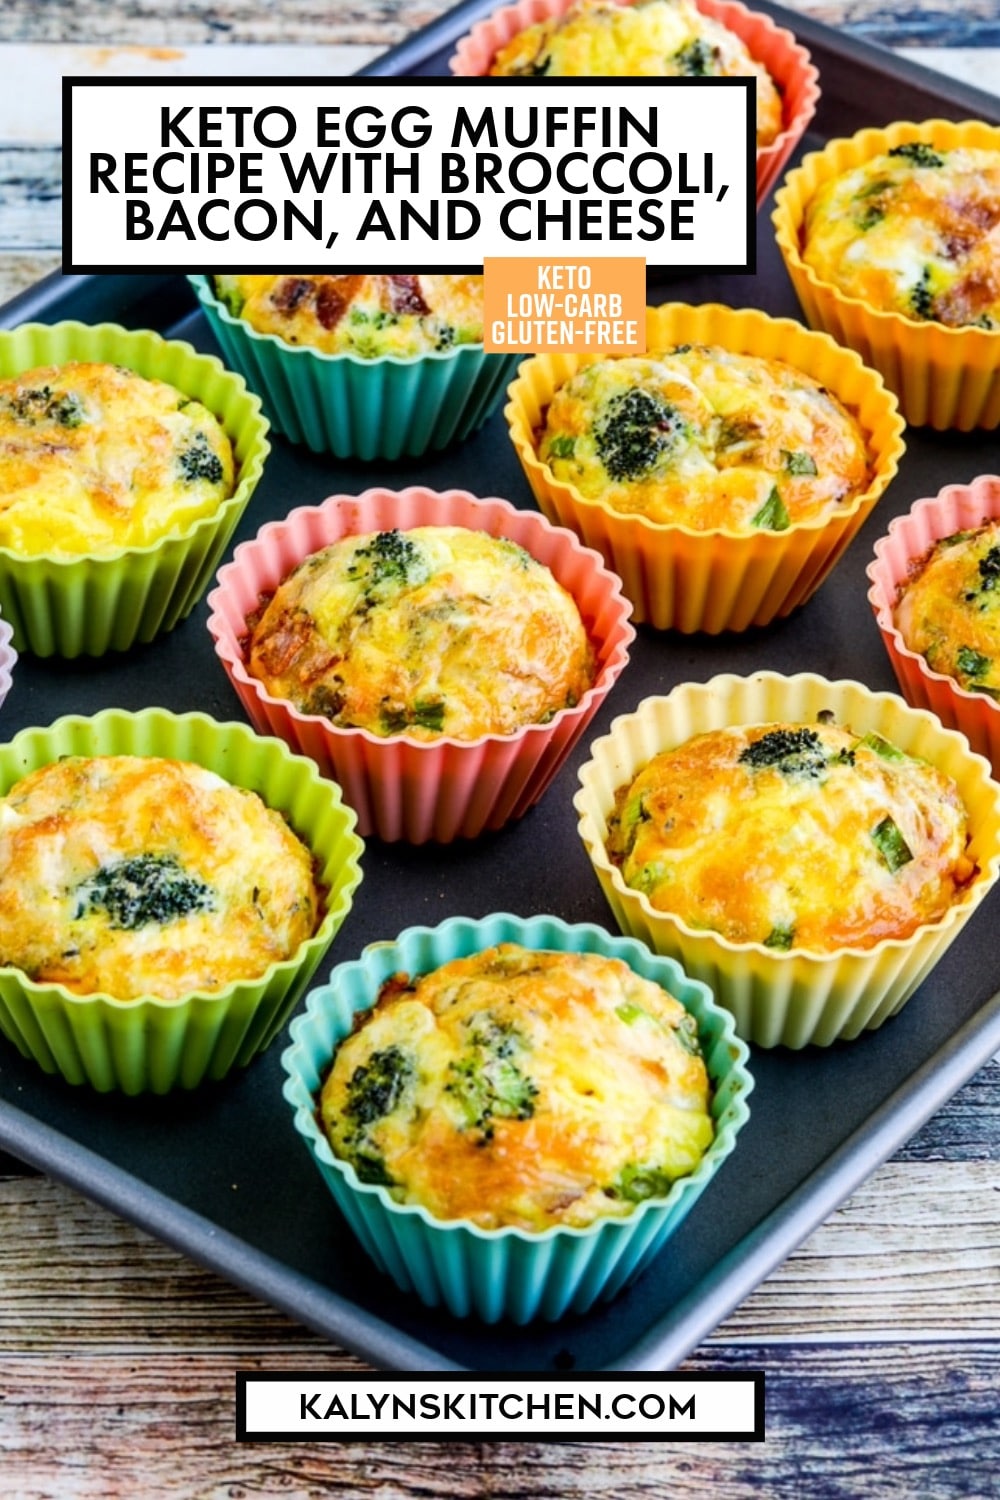 Pinterest image of Keto Egg Muffin Recipe with Broccoli, Bacon, and Cheese